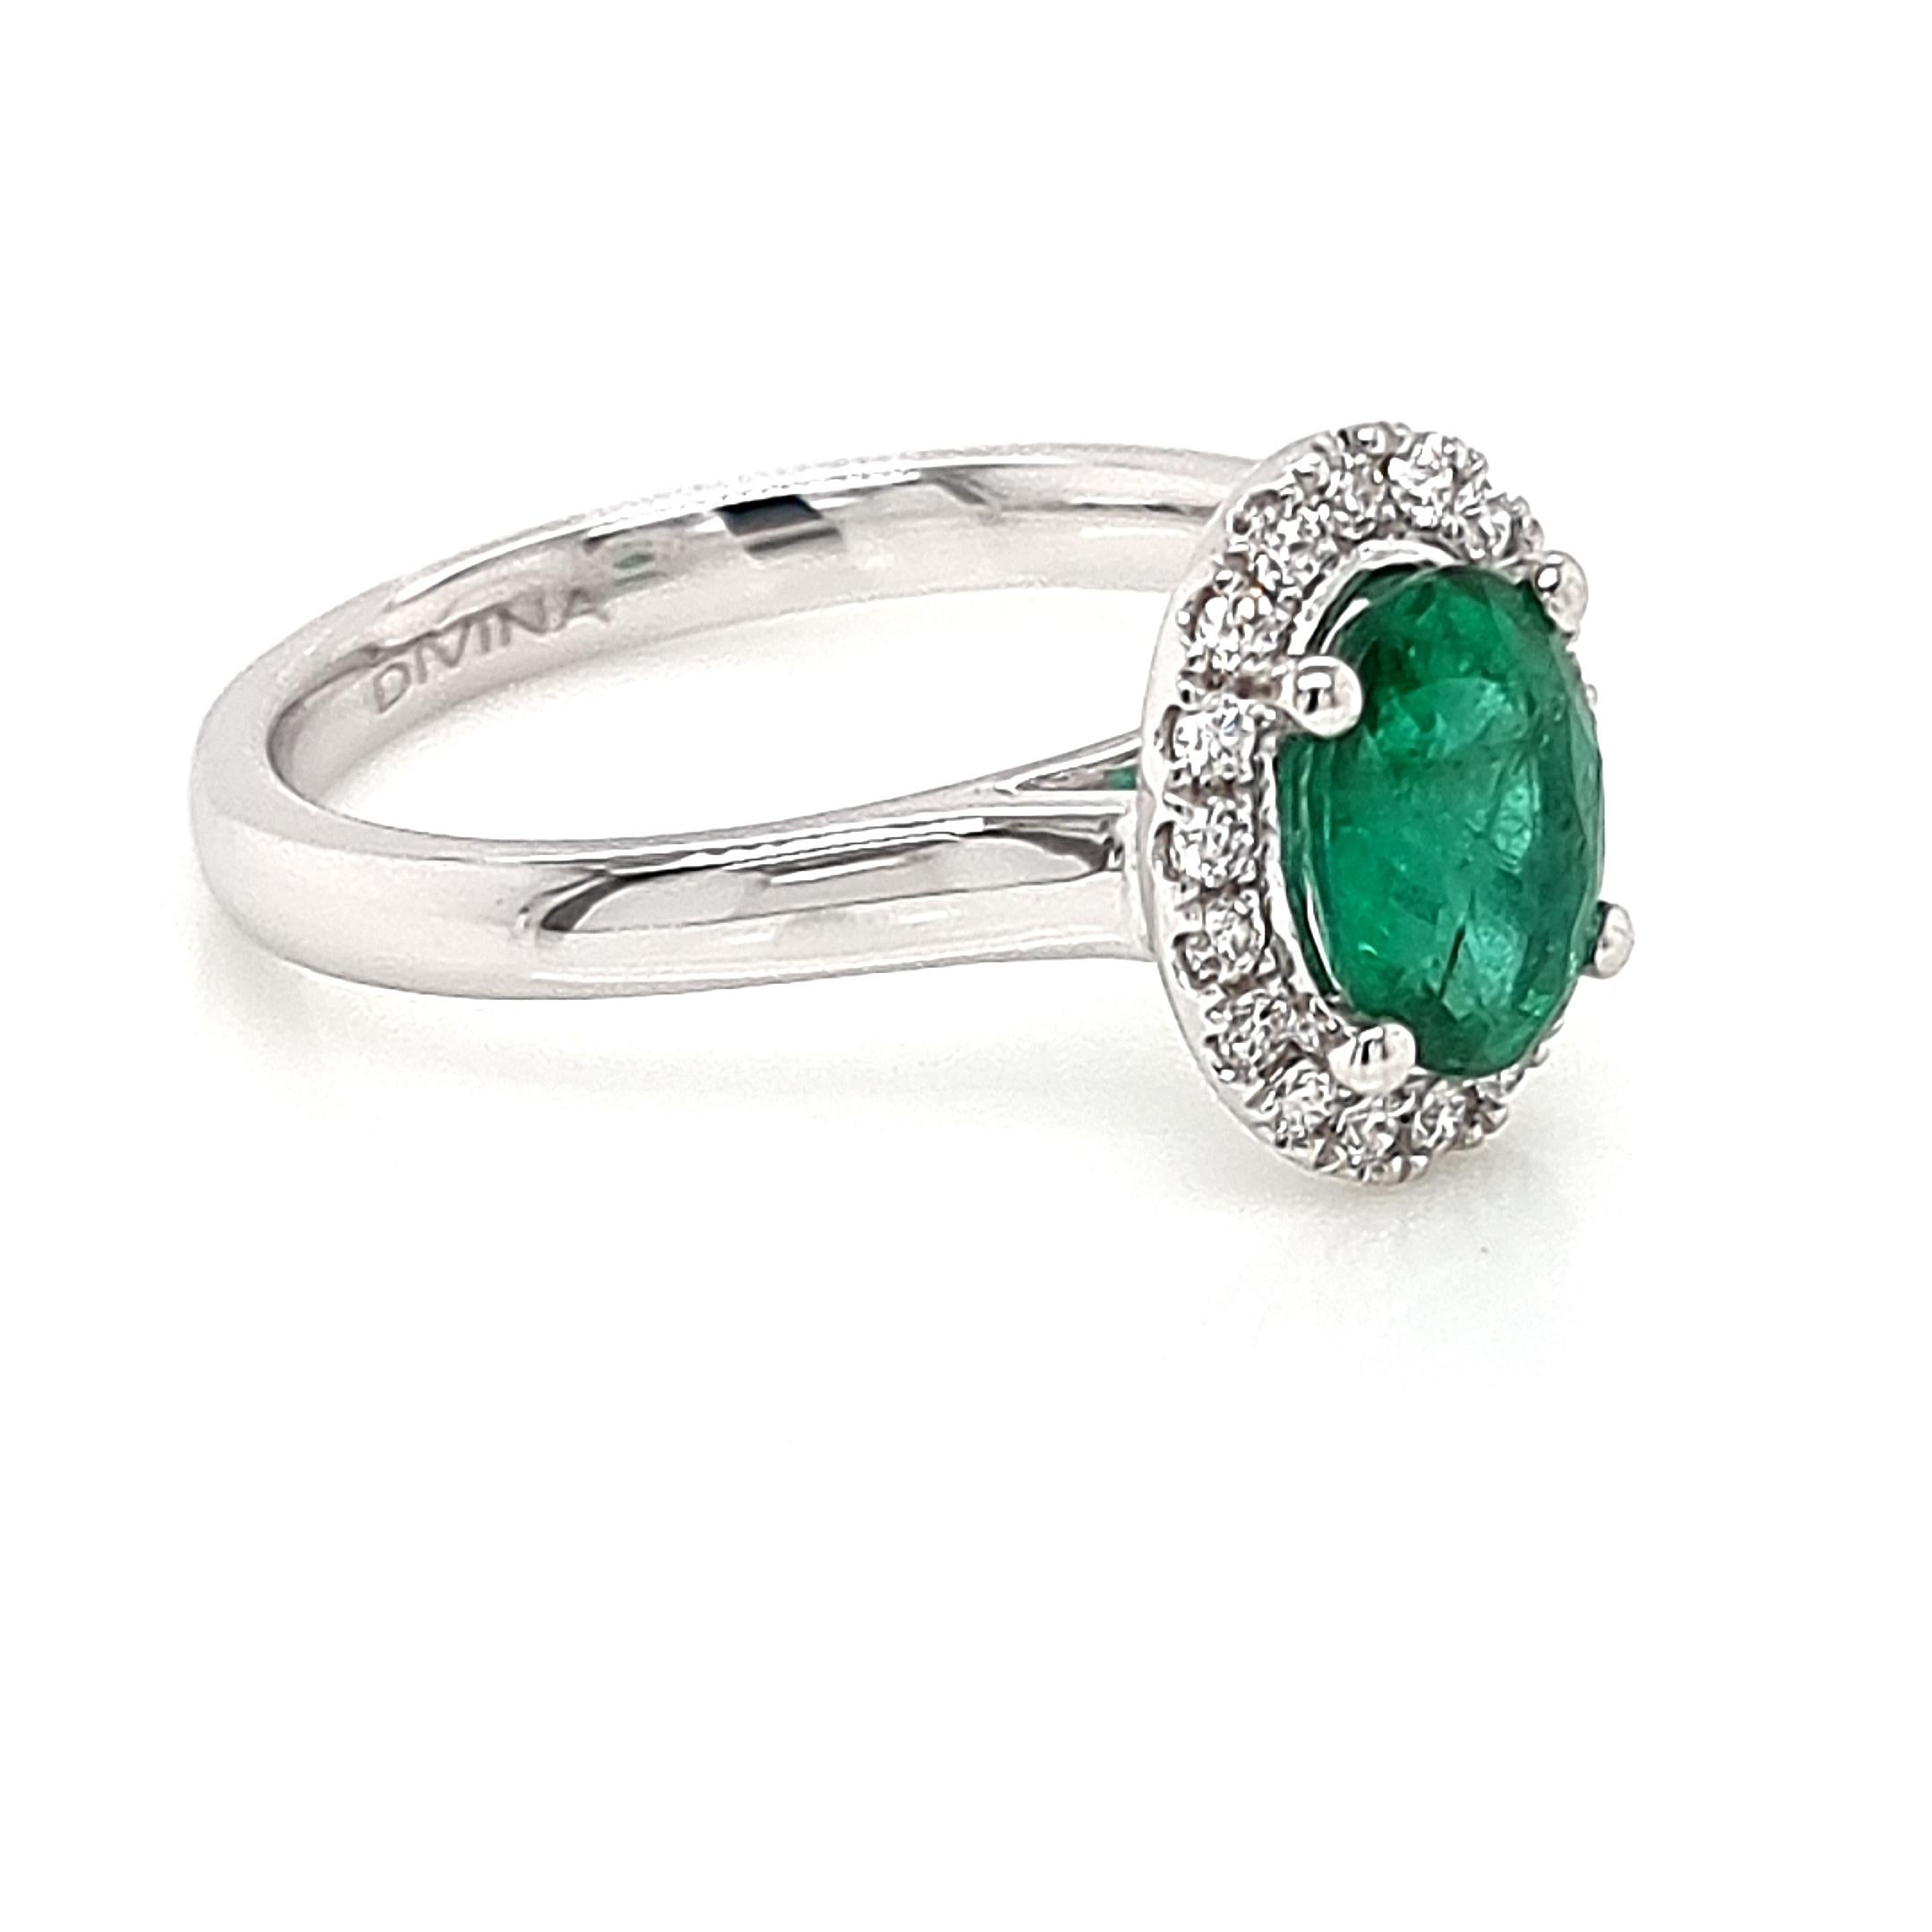 Have you seen our timeless classic style halo ring? A true symbol of refined elegance and sophistication. Meticulously crafted in 9K white gold, this exquisite piece exudes a luxurious allure. At its heart lies a Zambian oval emerald, radiating a